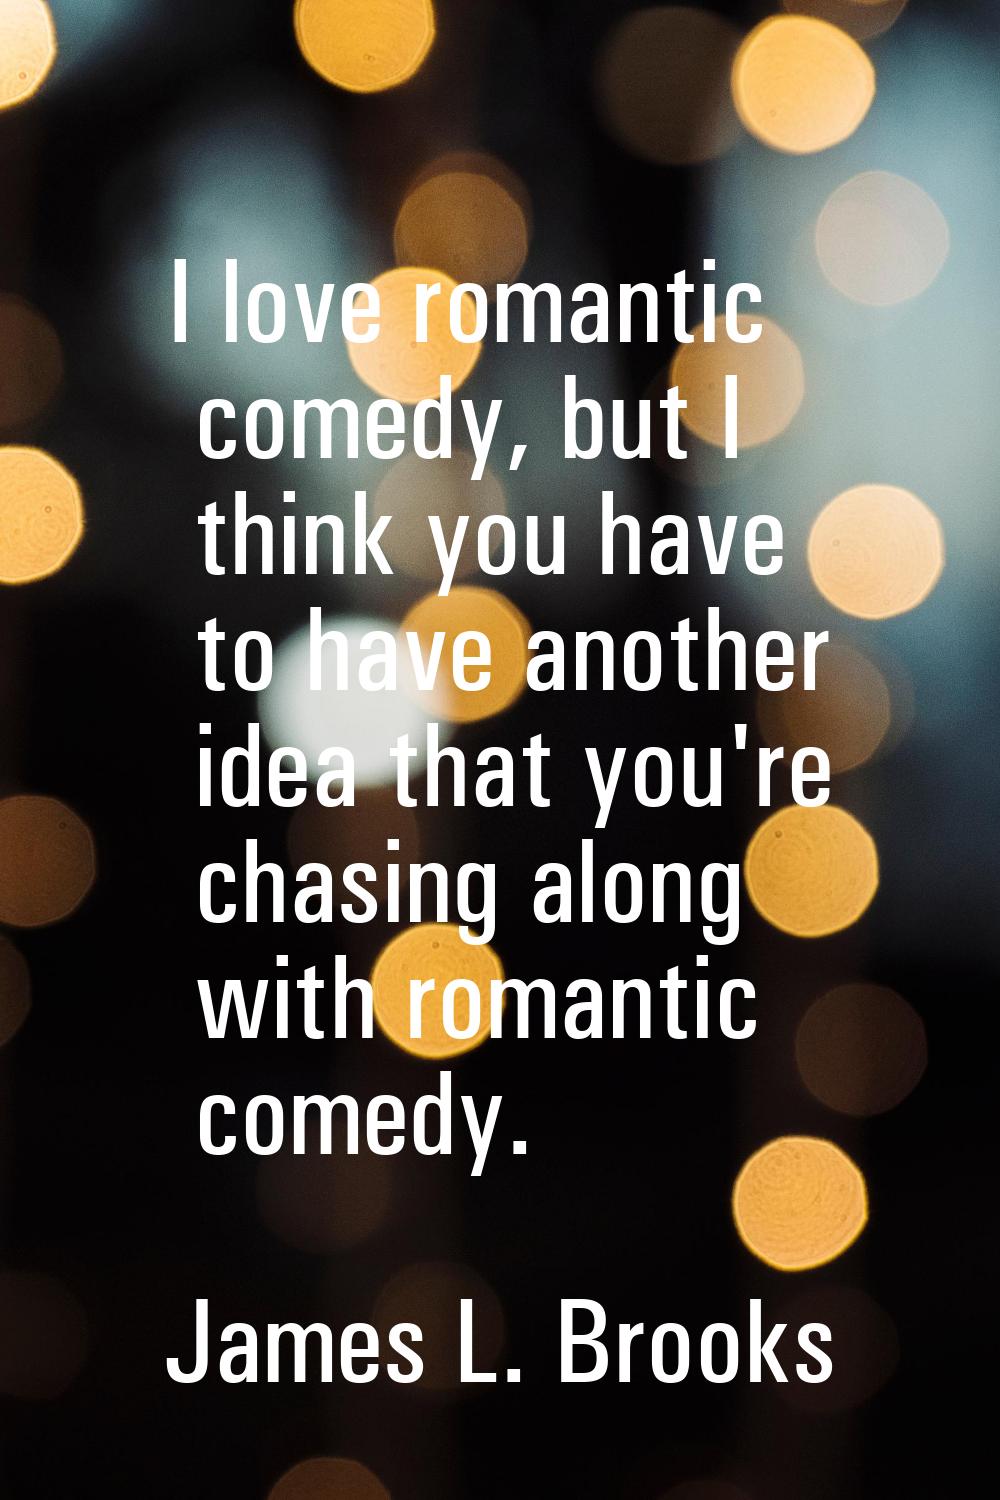 I love romantic comedy, but I think you have to have another idea that you're chasing along with ro